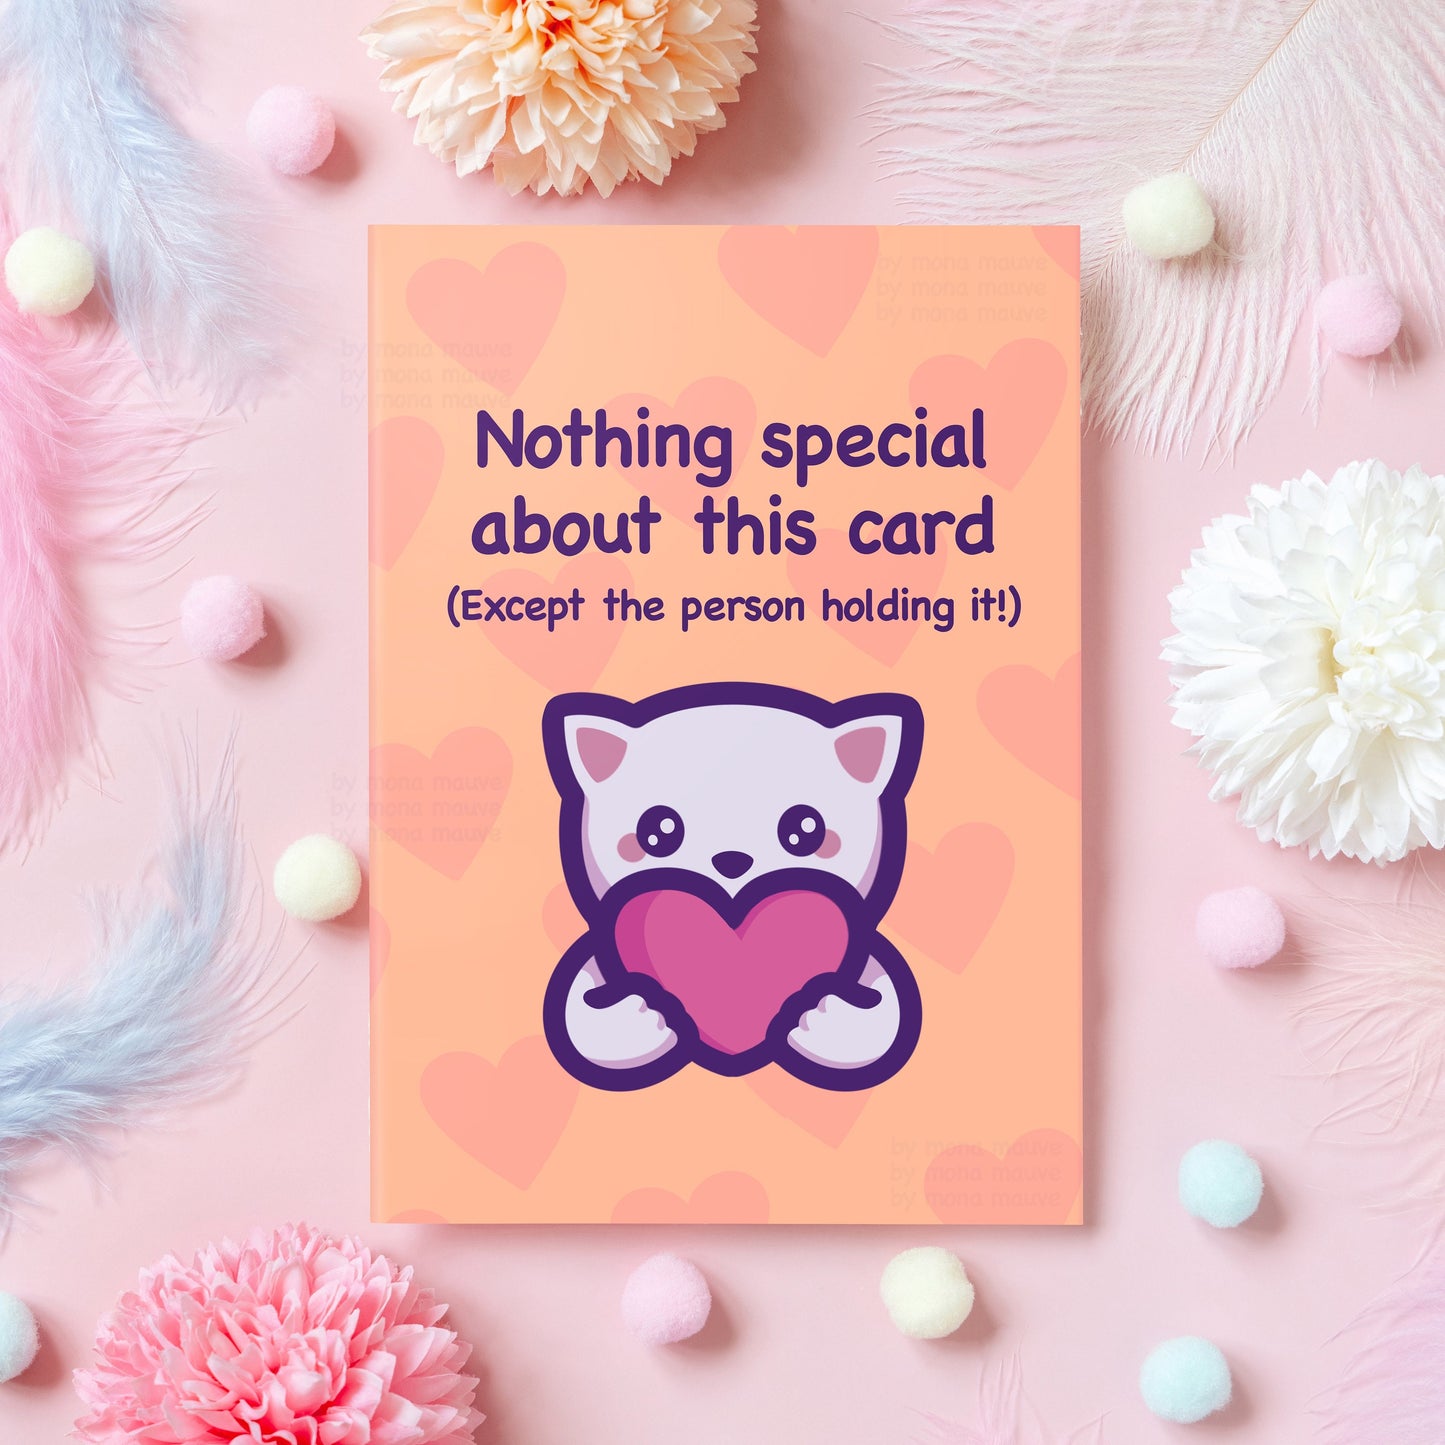 Cute Cat Card | Nothing Special About This Card (Except the Person Holding It) | Cat Meme Gift For Boyfriend, Girlfriend, Husband, Wife, Best Friend - Her or Him